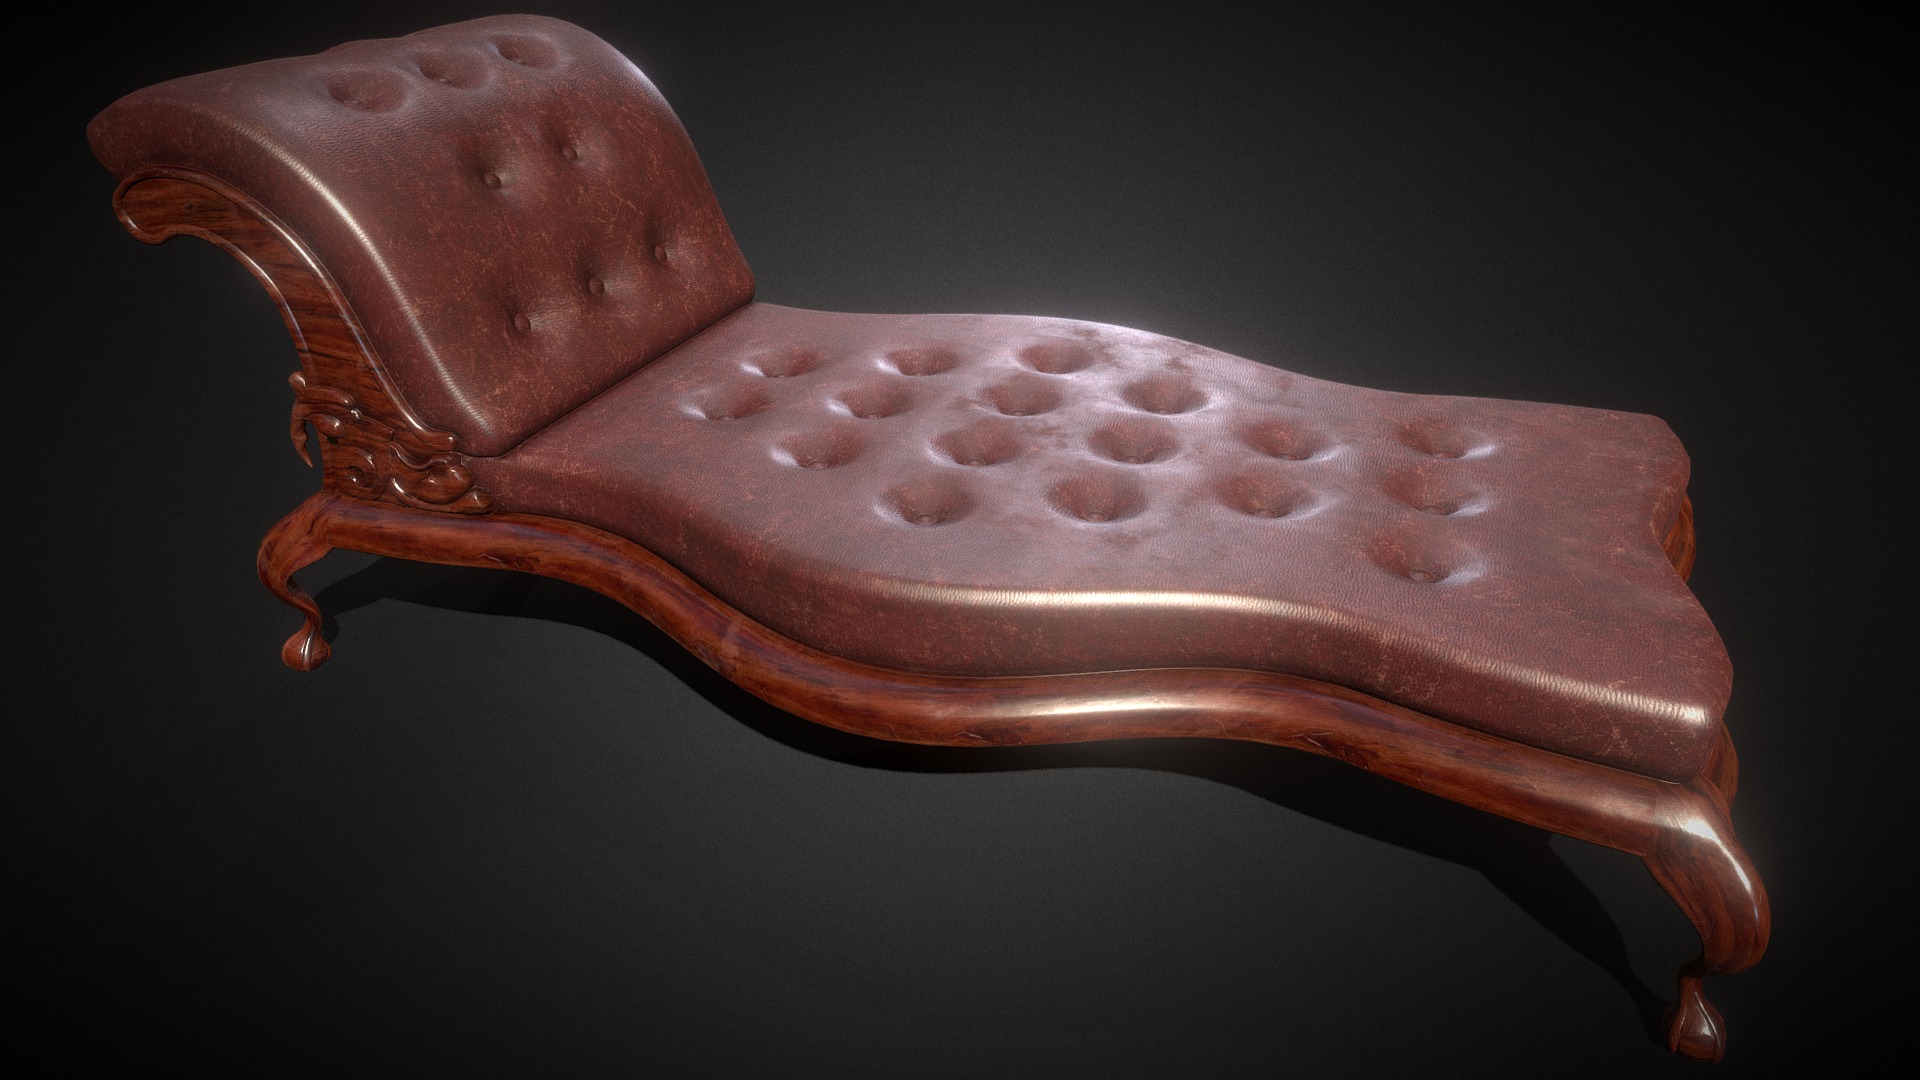 3D model Sofa Victorian 002a - This is a 3D model of the Sofa Victorian 002a. The 3D model is about a brown leather chair.